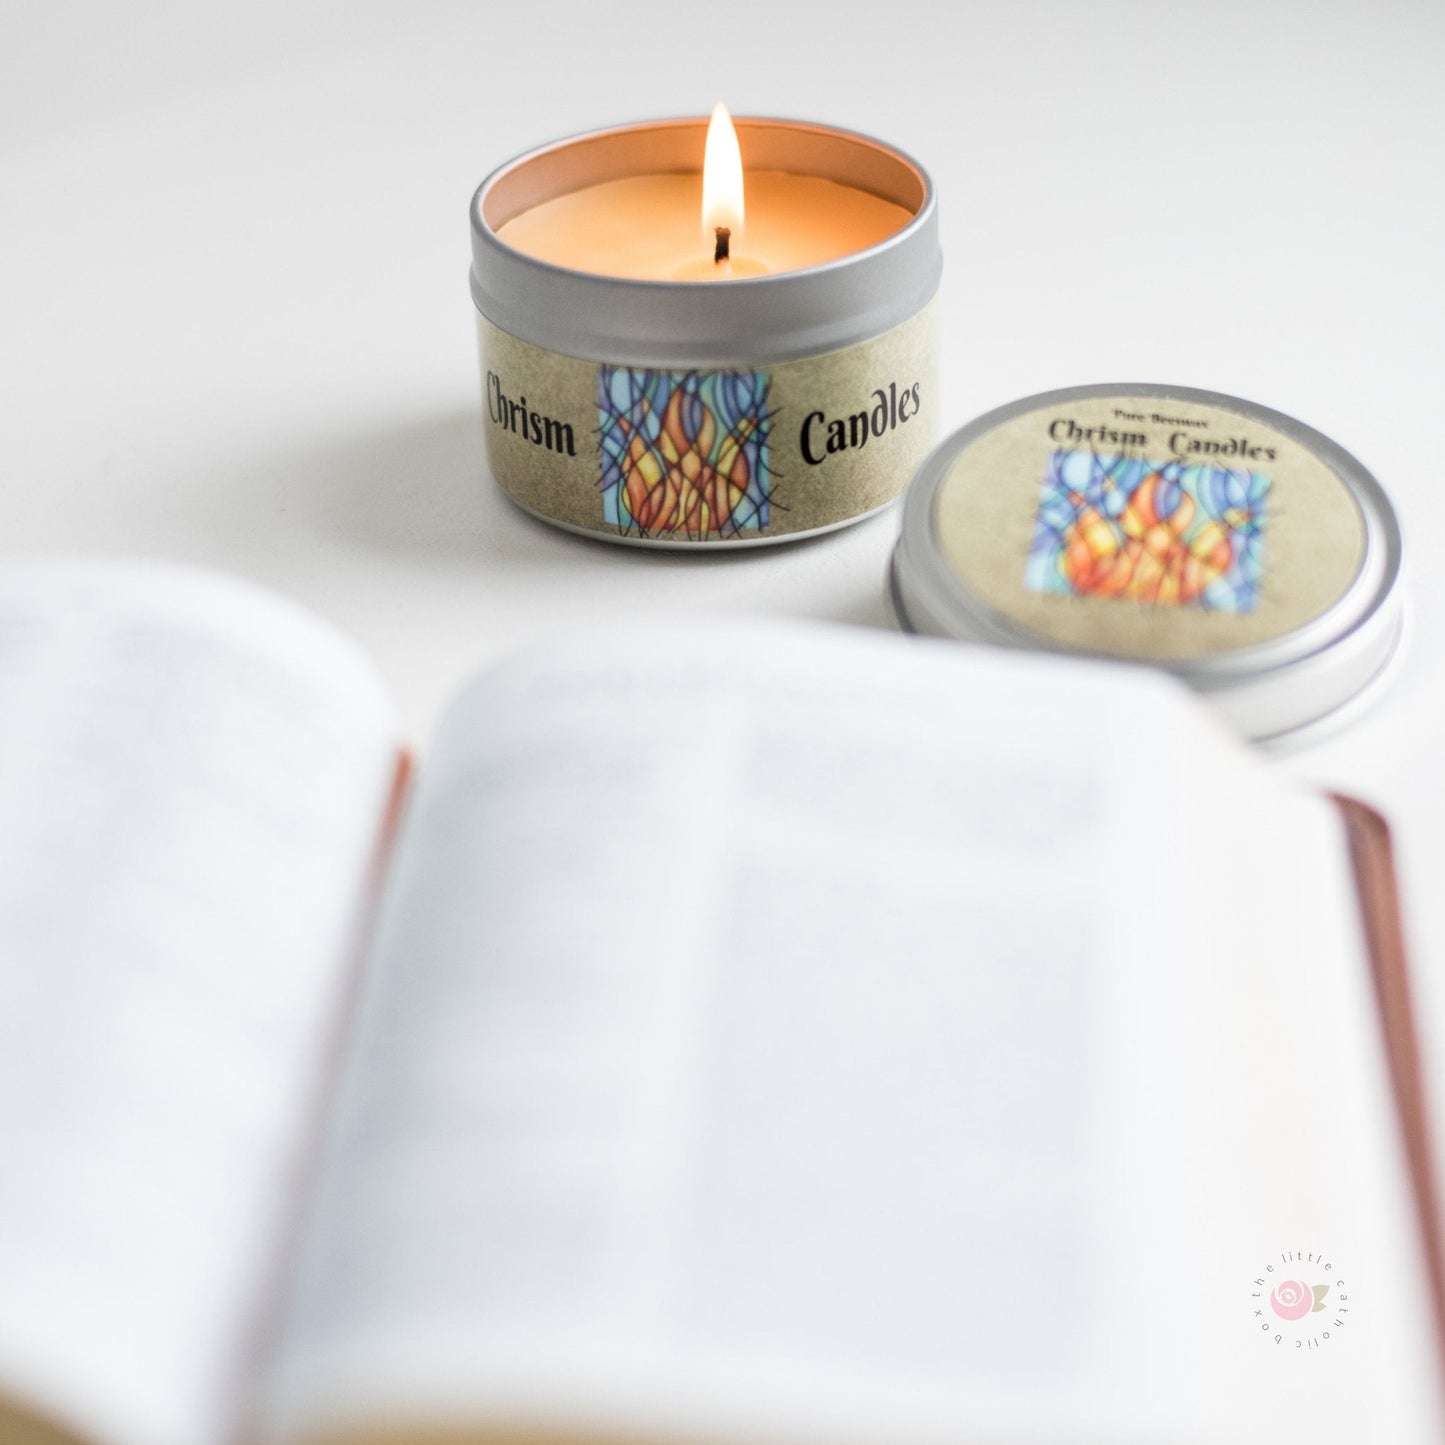 Chrism Scented Candle tins (Imperfect)